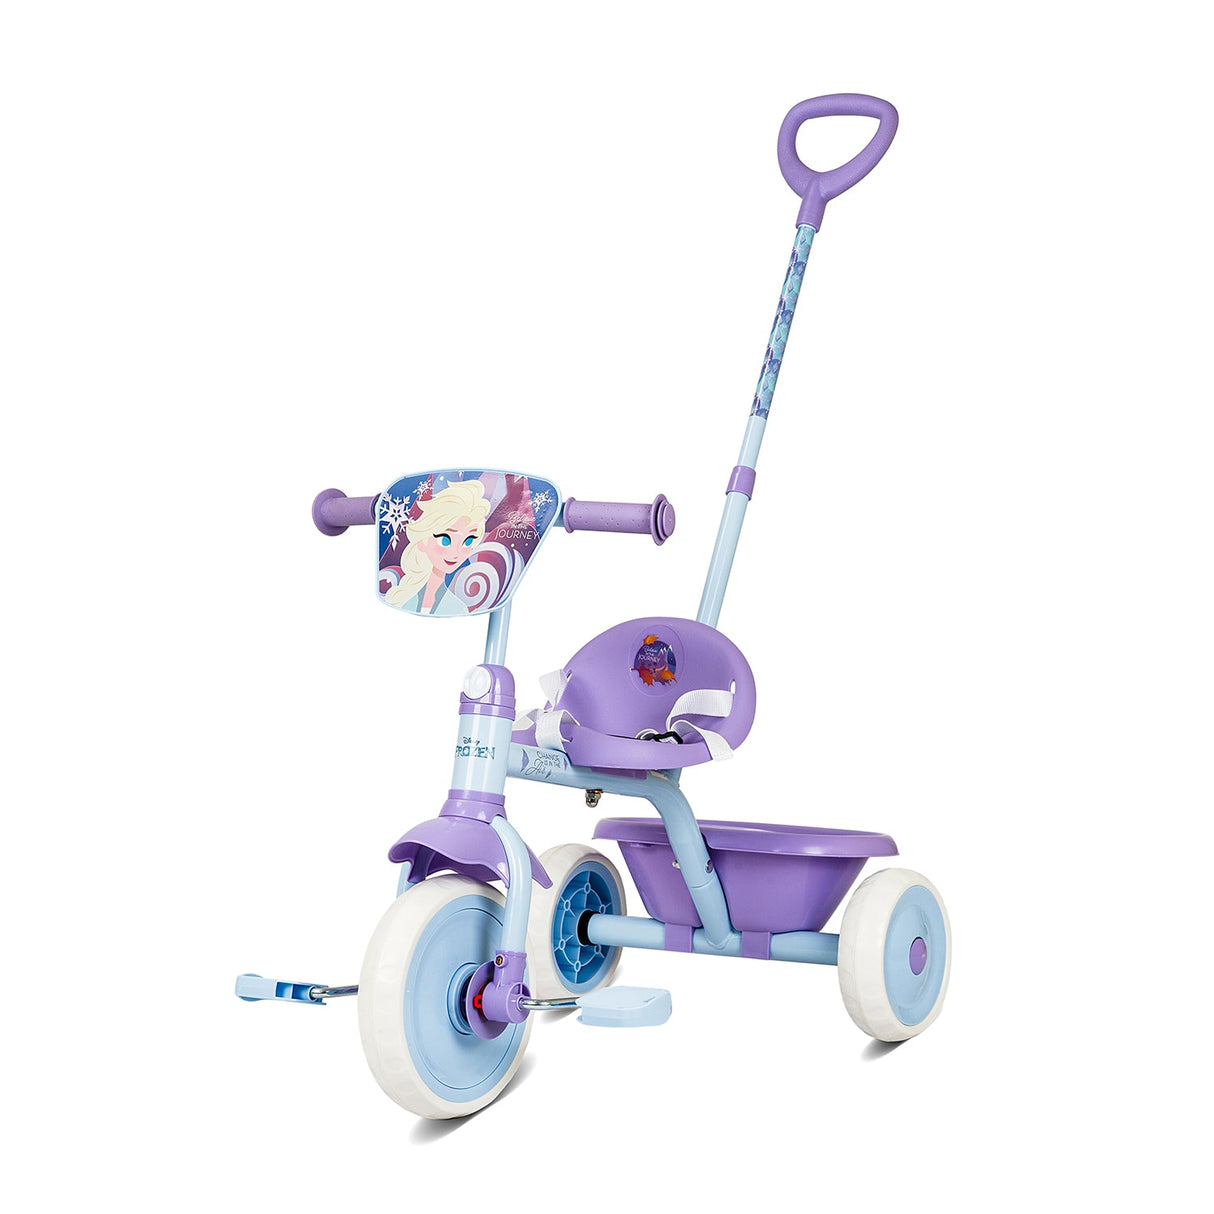 Spartan Disney Frozen Tricycle with Pushbar